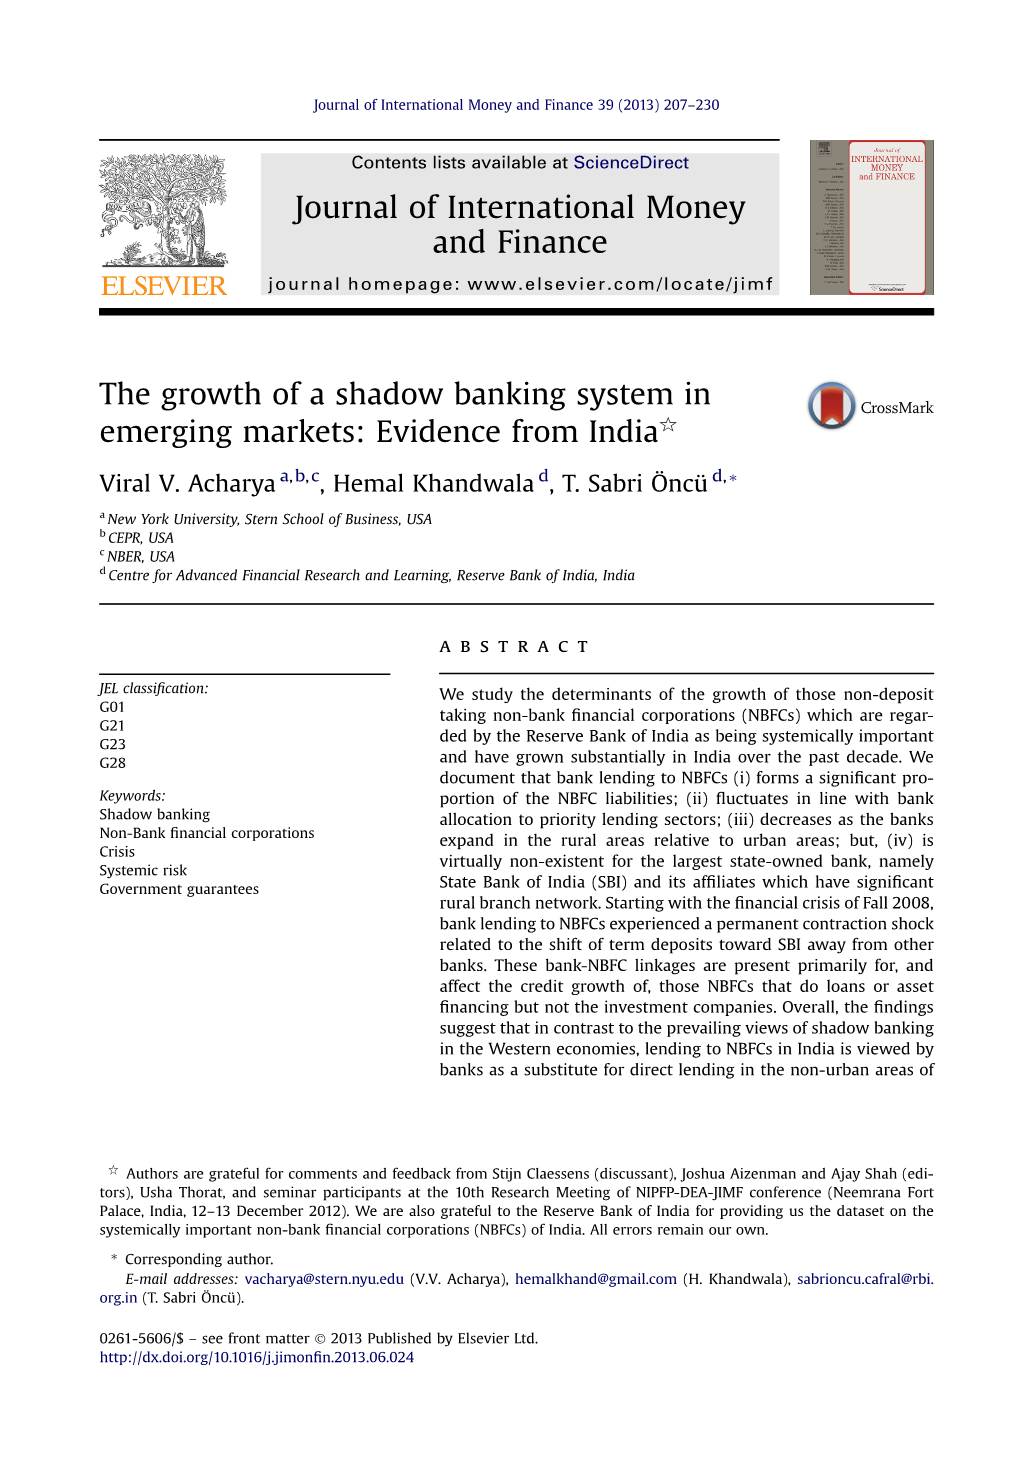 The Growth of a Shadow Banking System in Emerging Markets: Evidence from Indiaq